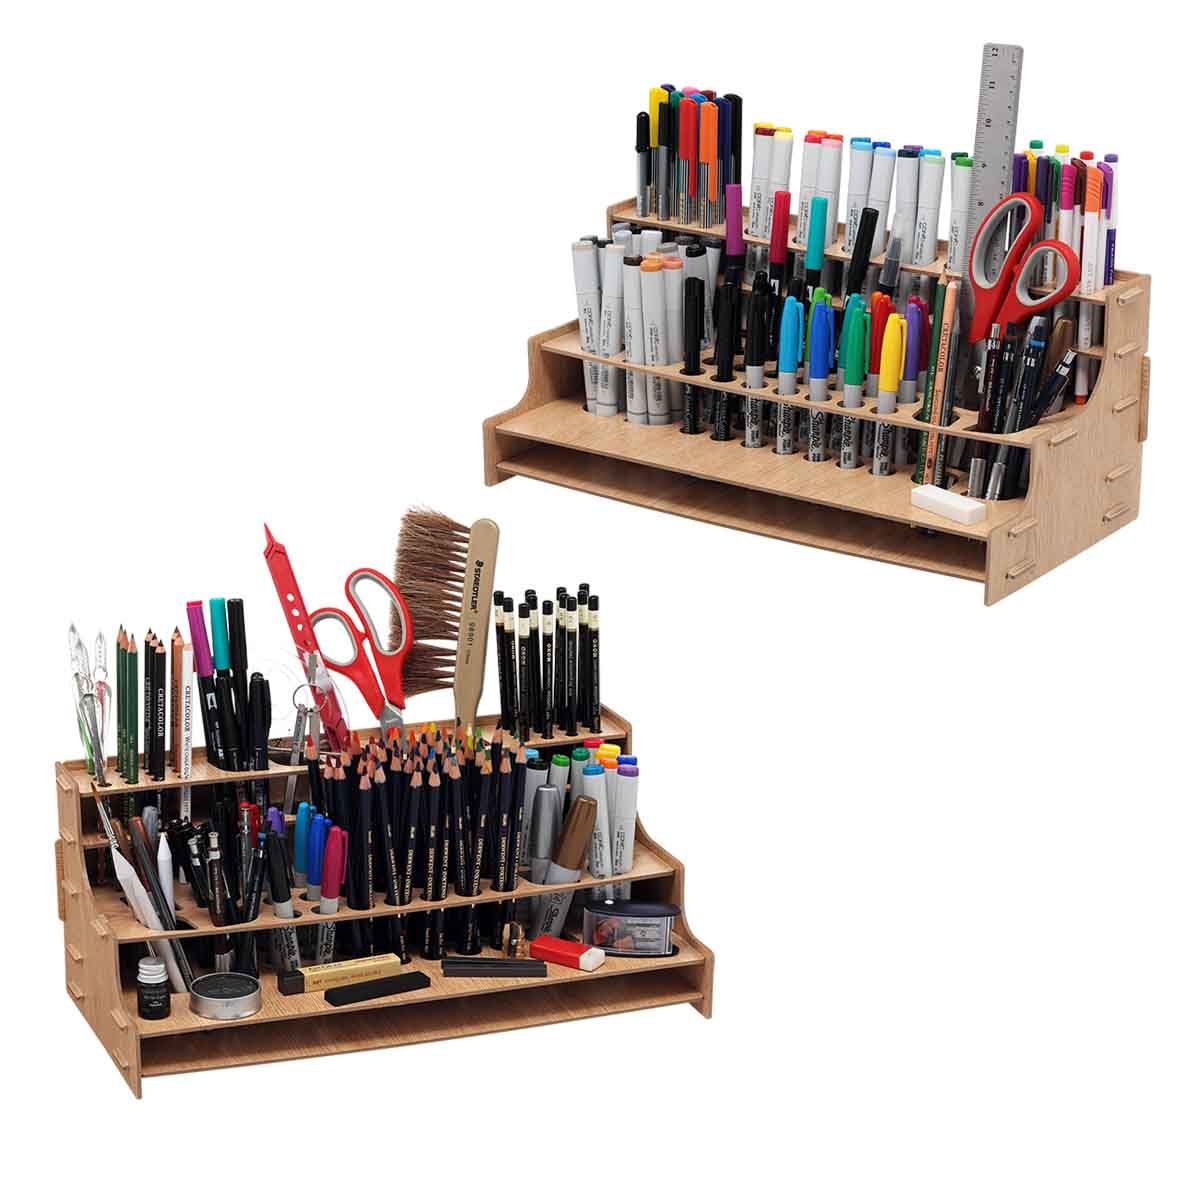 Different Ways To Use The Drawing Rack